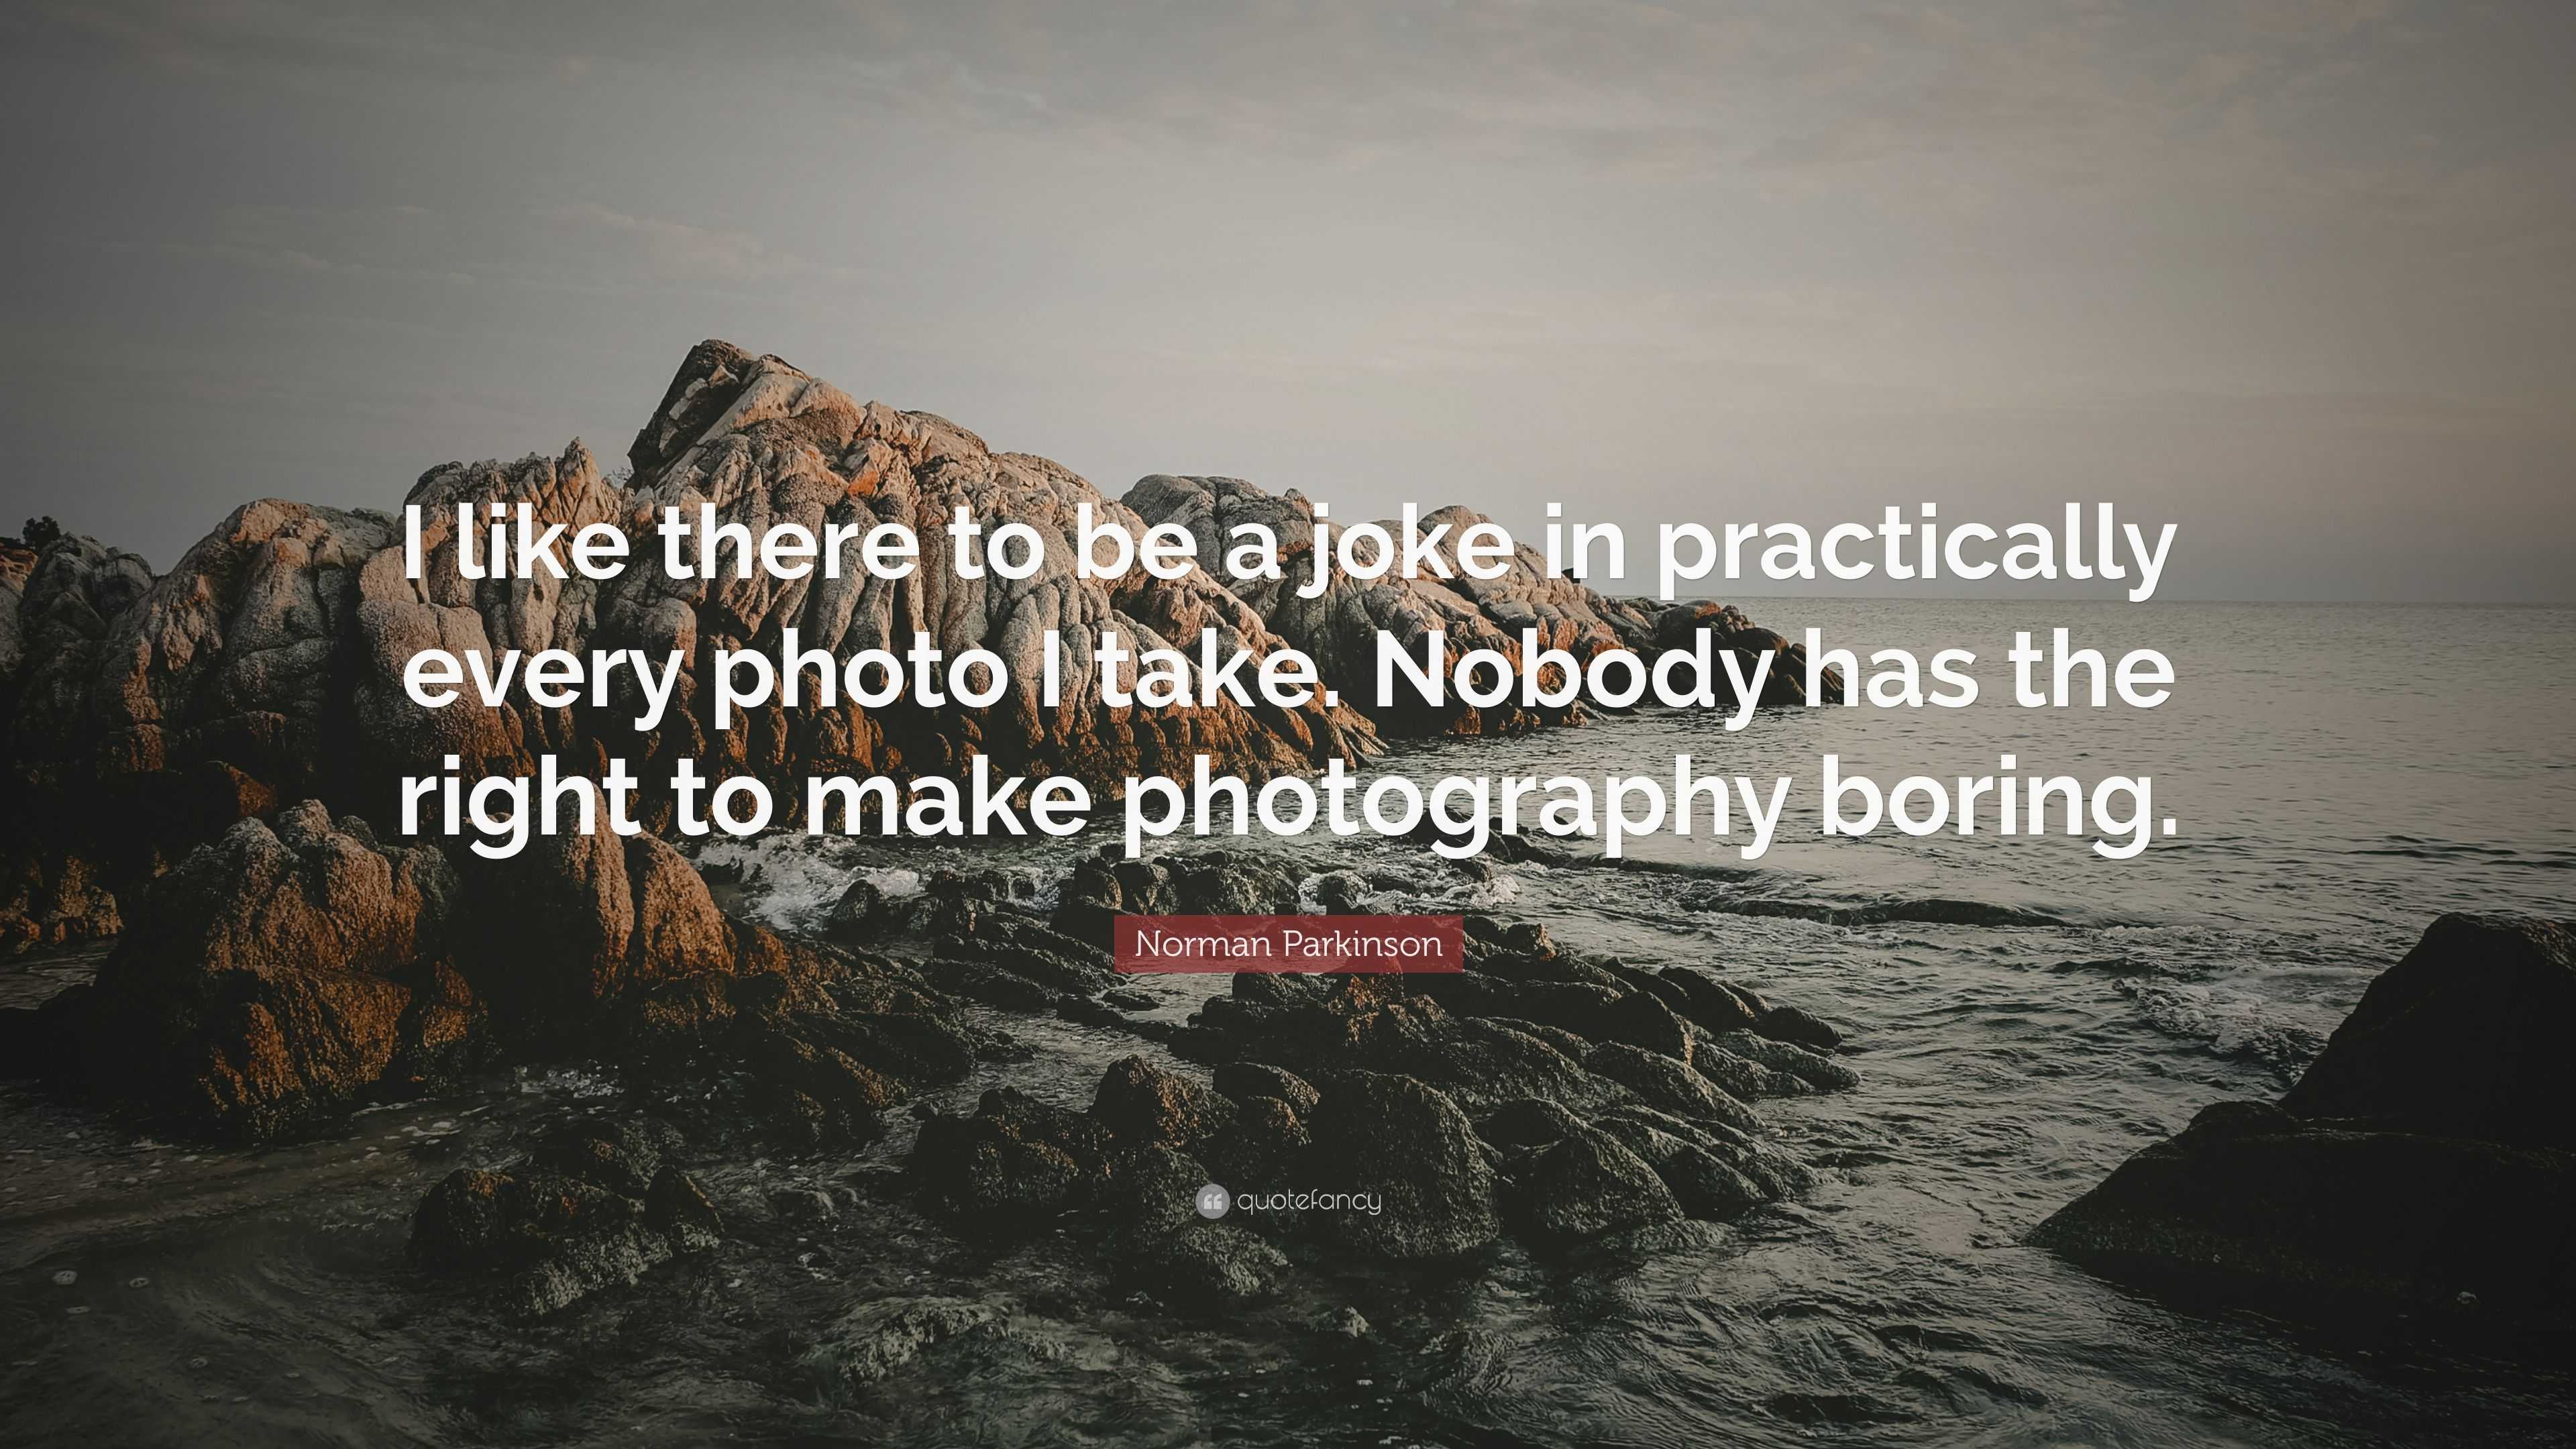 Norman Parkinson Quote: “I like there to be a joke in practically every ...